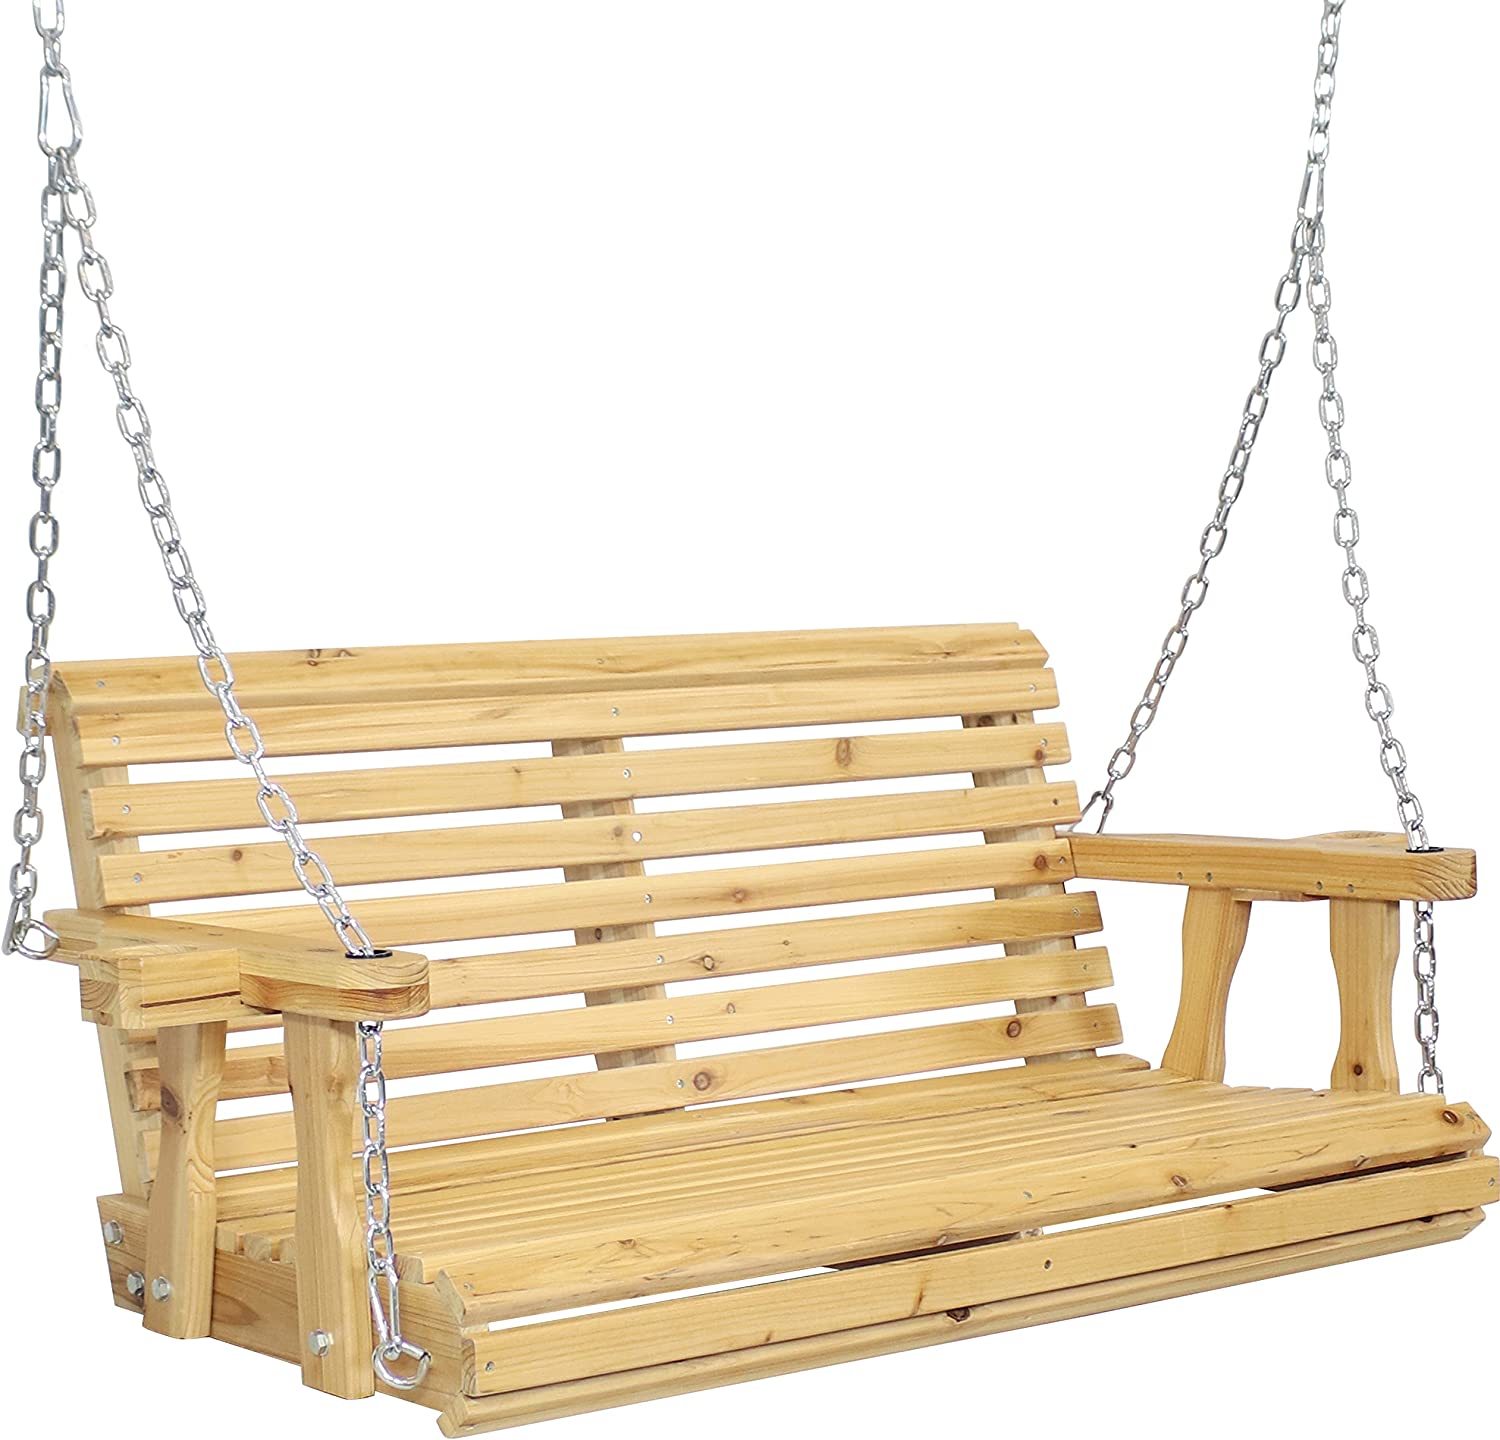 Sunnydaze Traditional Wooden Porch Swing - Hanging Outdoor, 58 Point 5 Inches. - $453.97